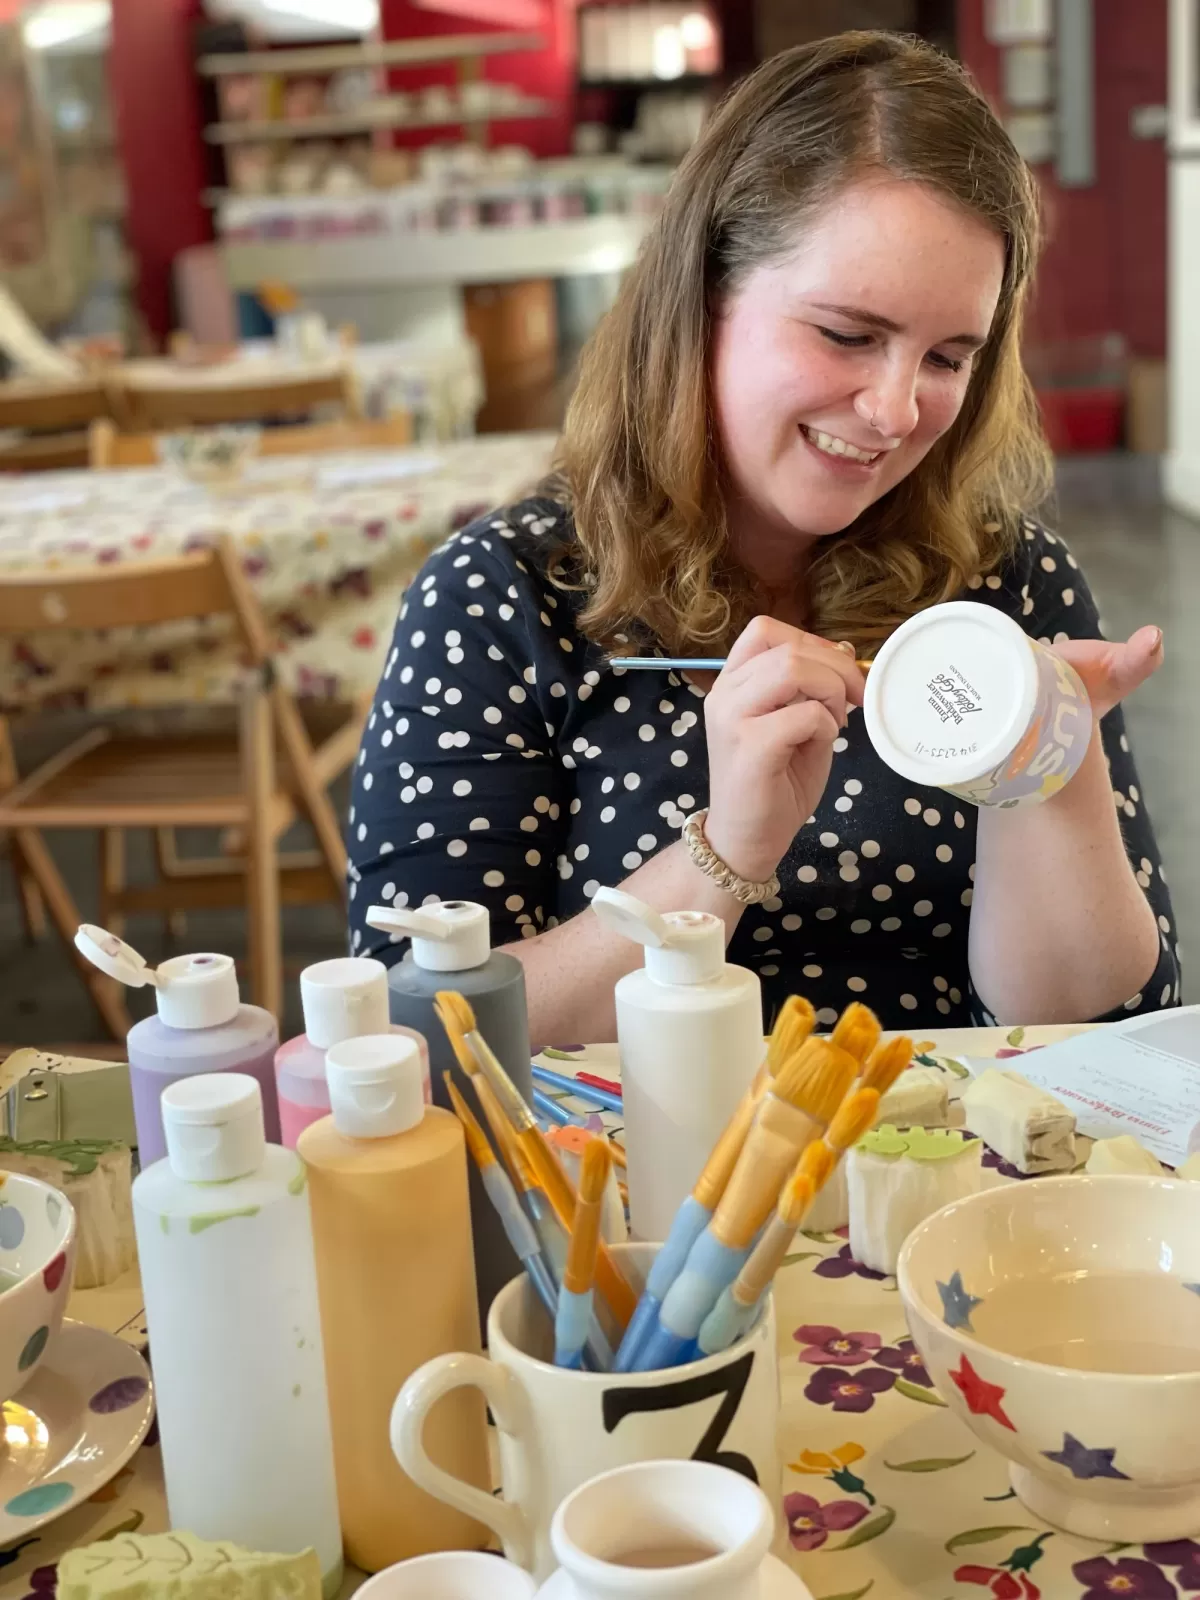 Paint your own Emma Bridgewater pottery